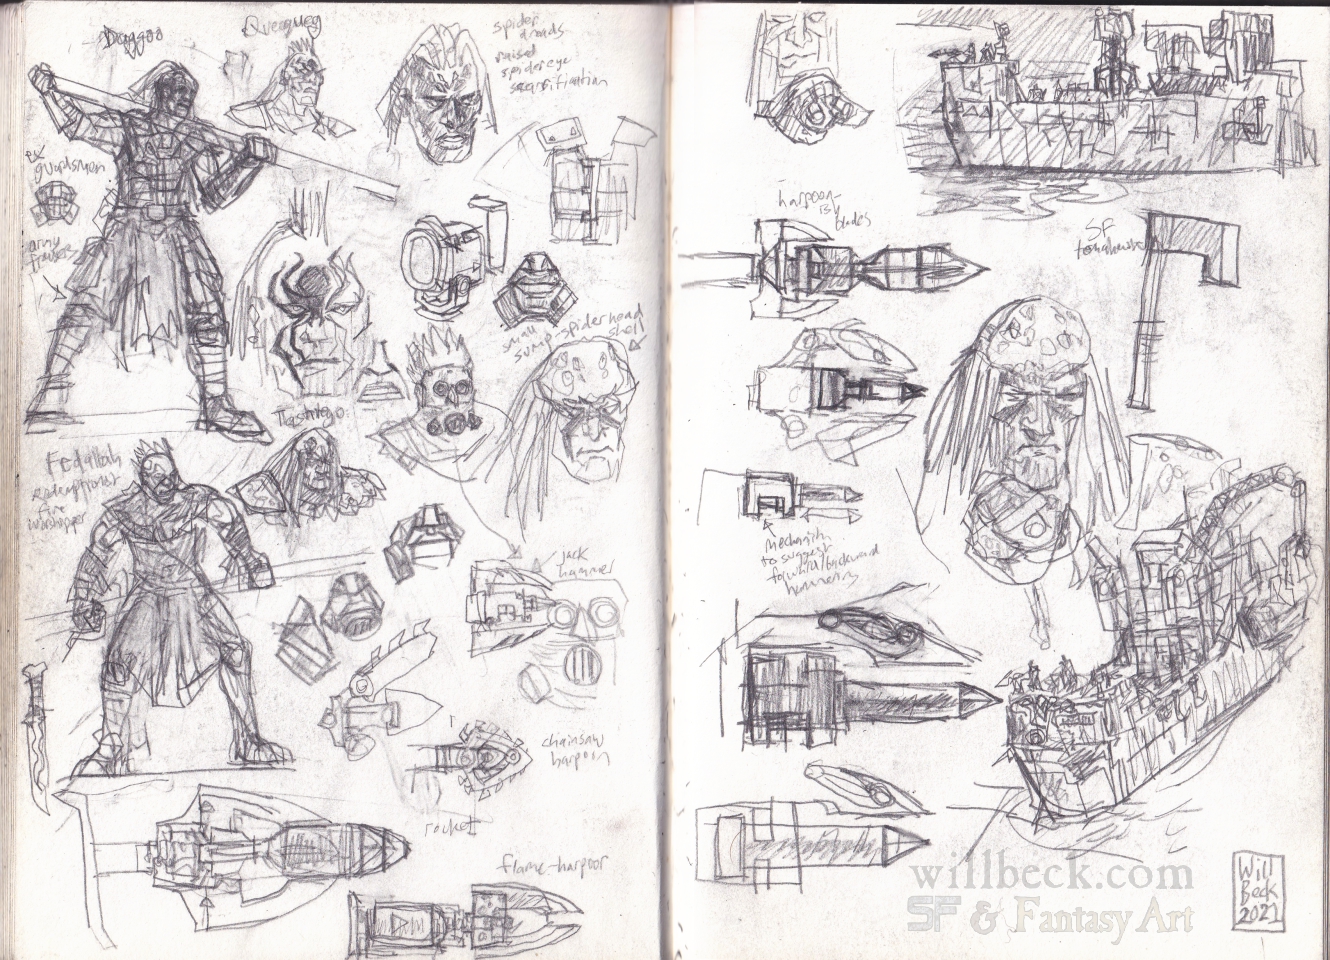 sketchbook pages showing the development of the Sump Ship crew concepts